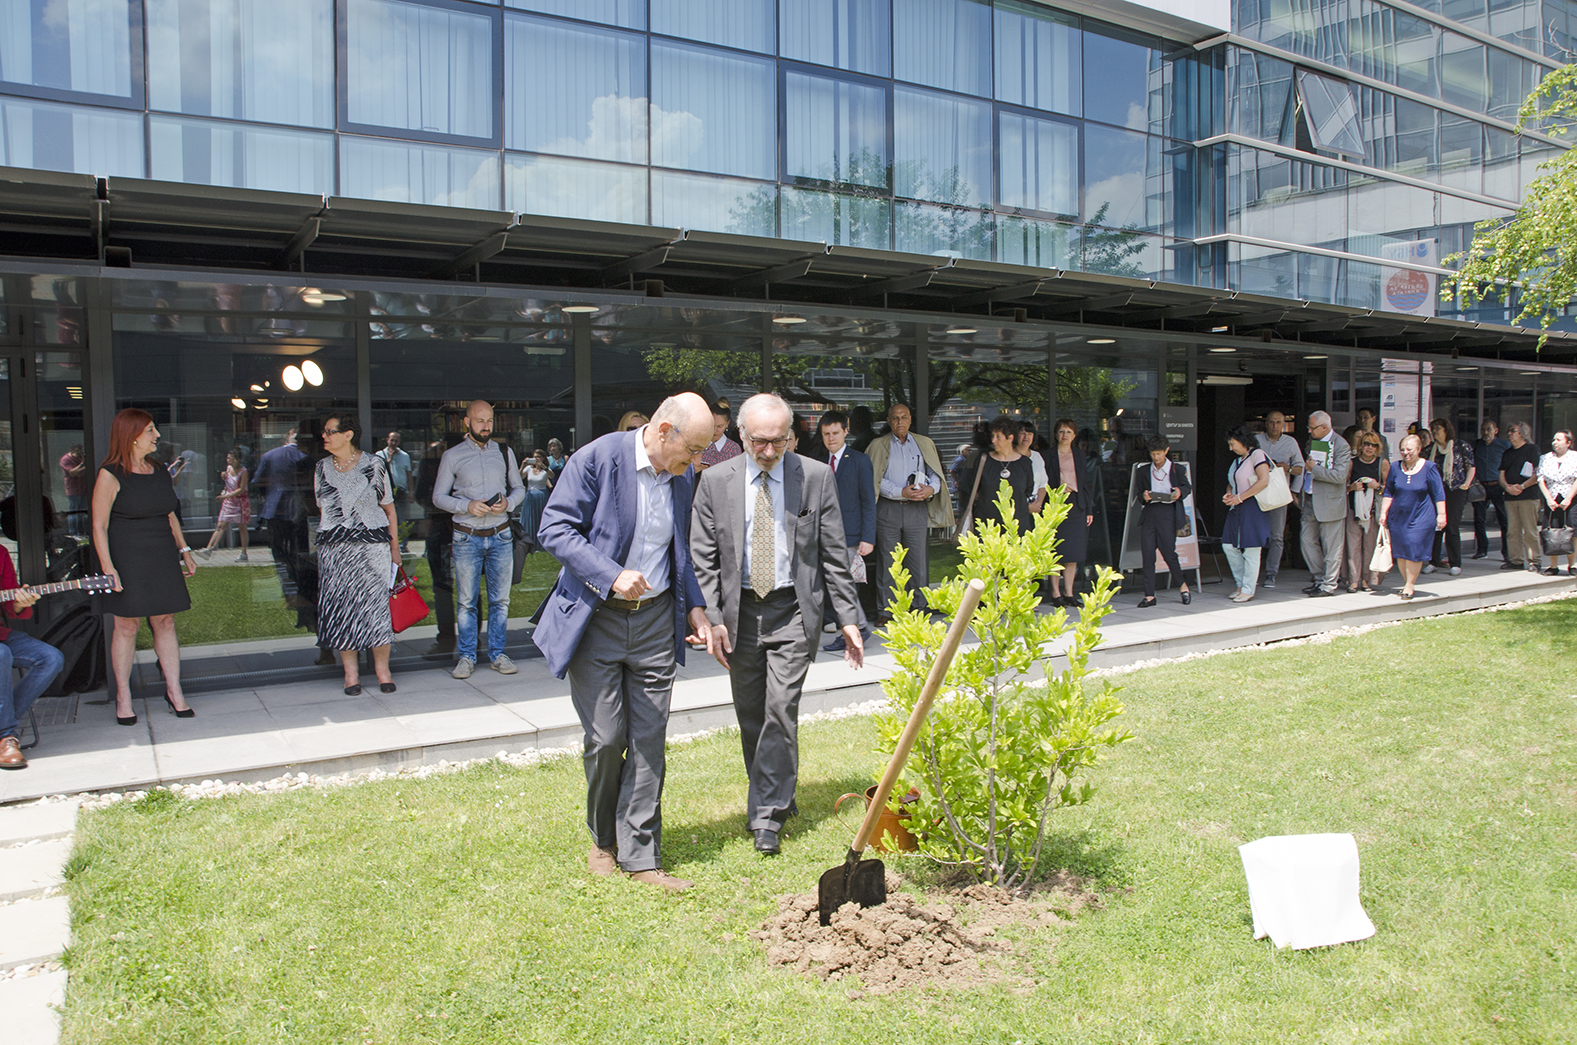 The planting of the magnolia tree in honor of Dimitar Peshev